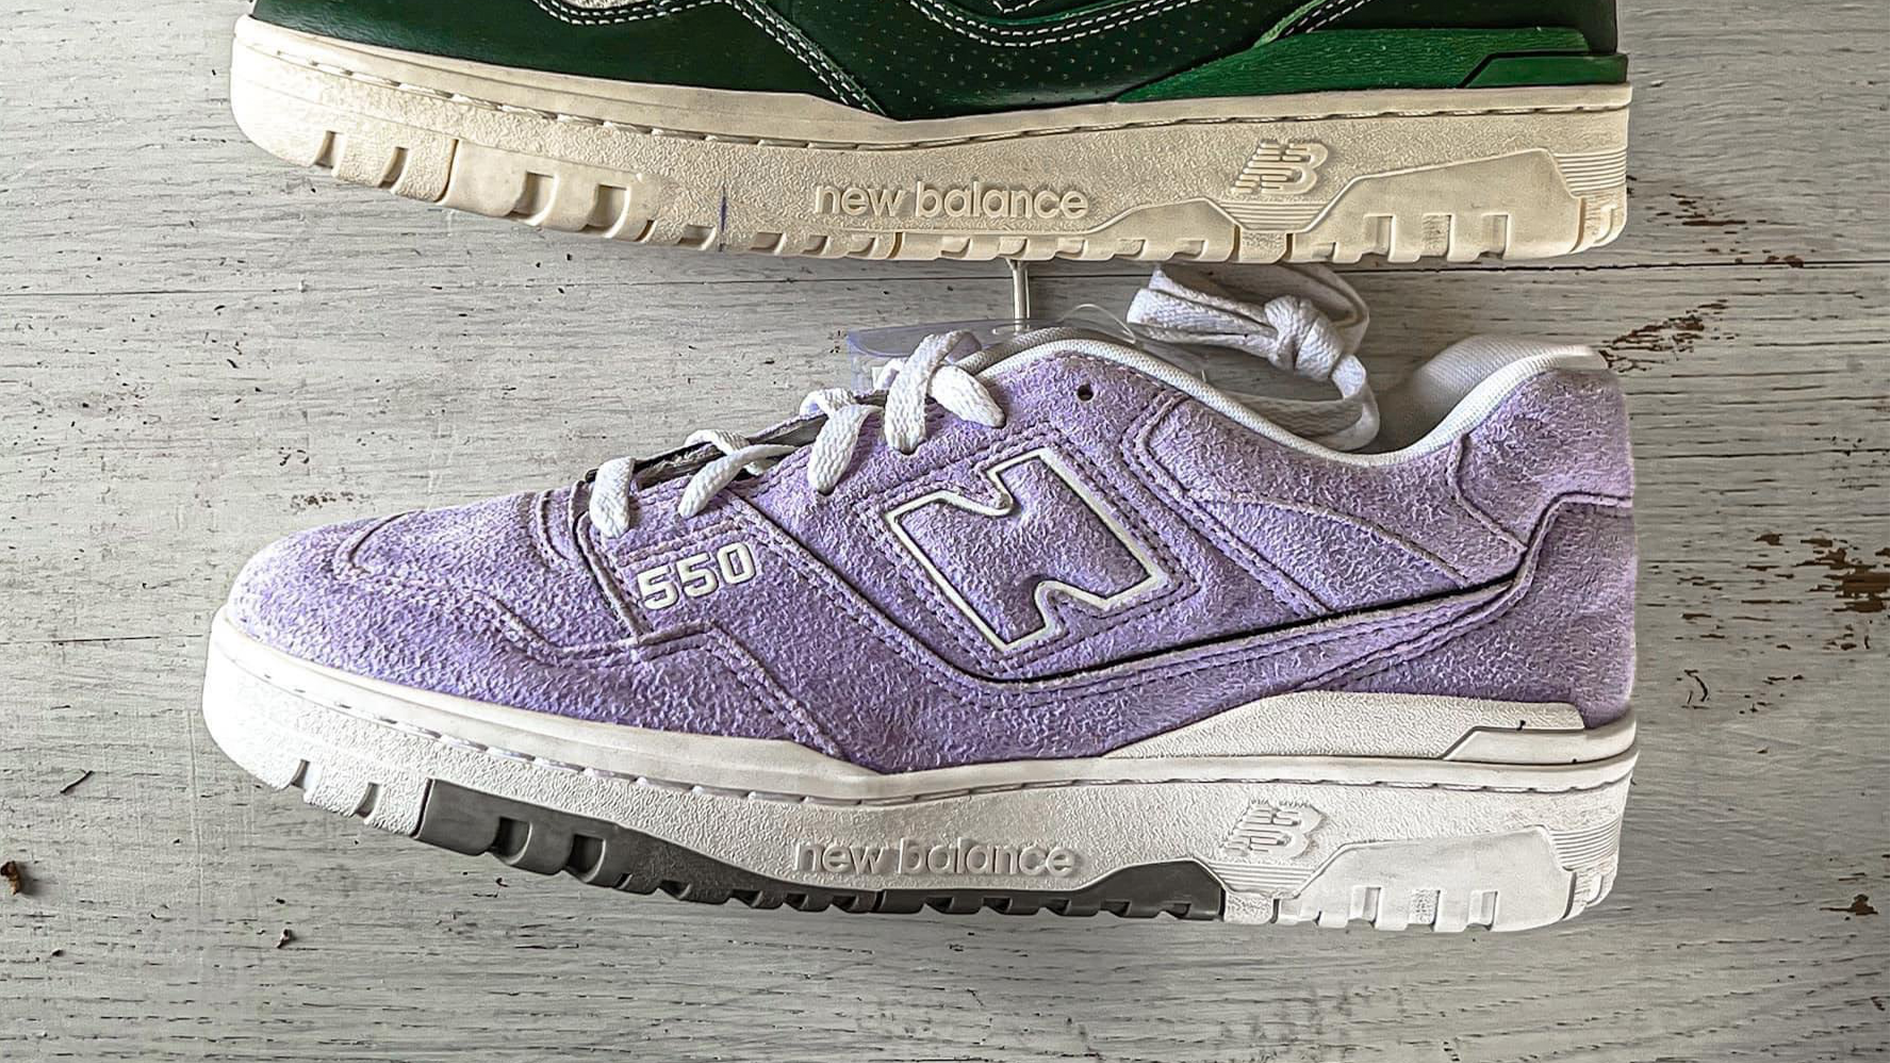 Aime Leon Dore and New Balance's 650R Sneakers Will Drop This